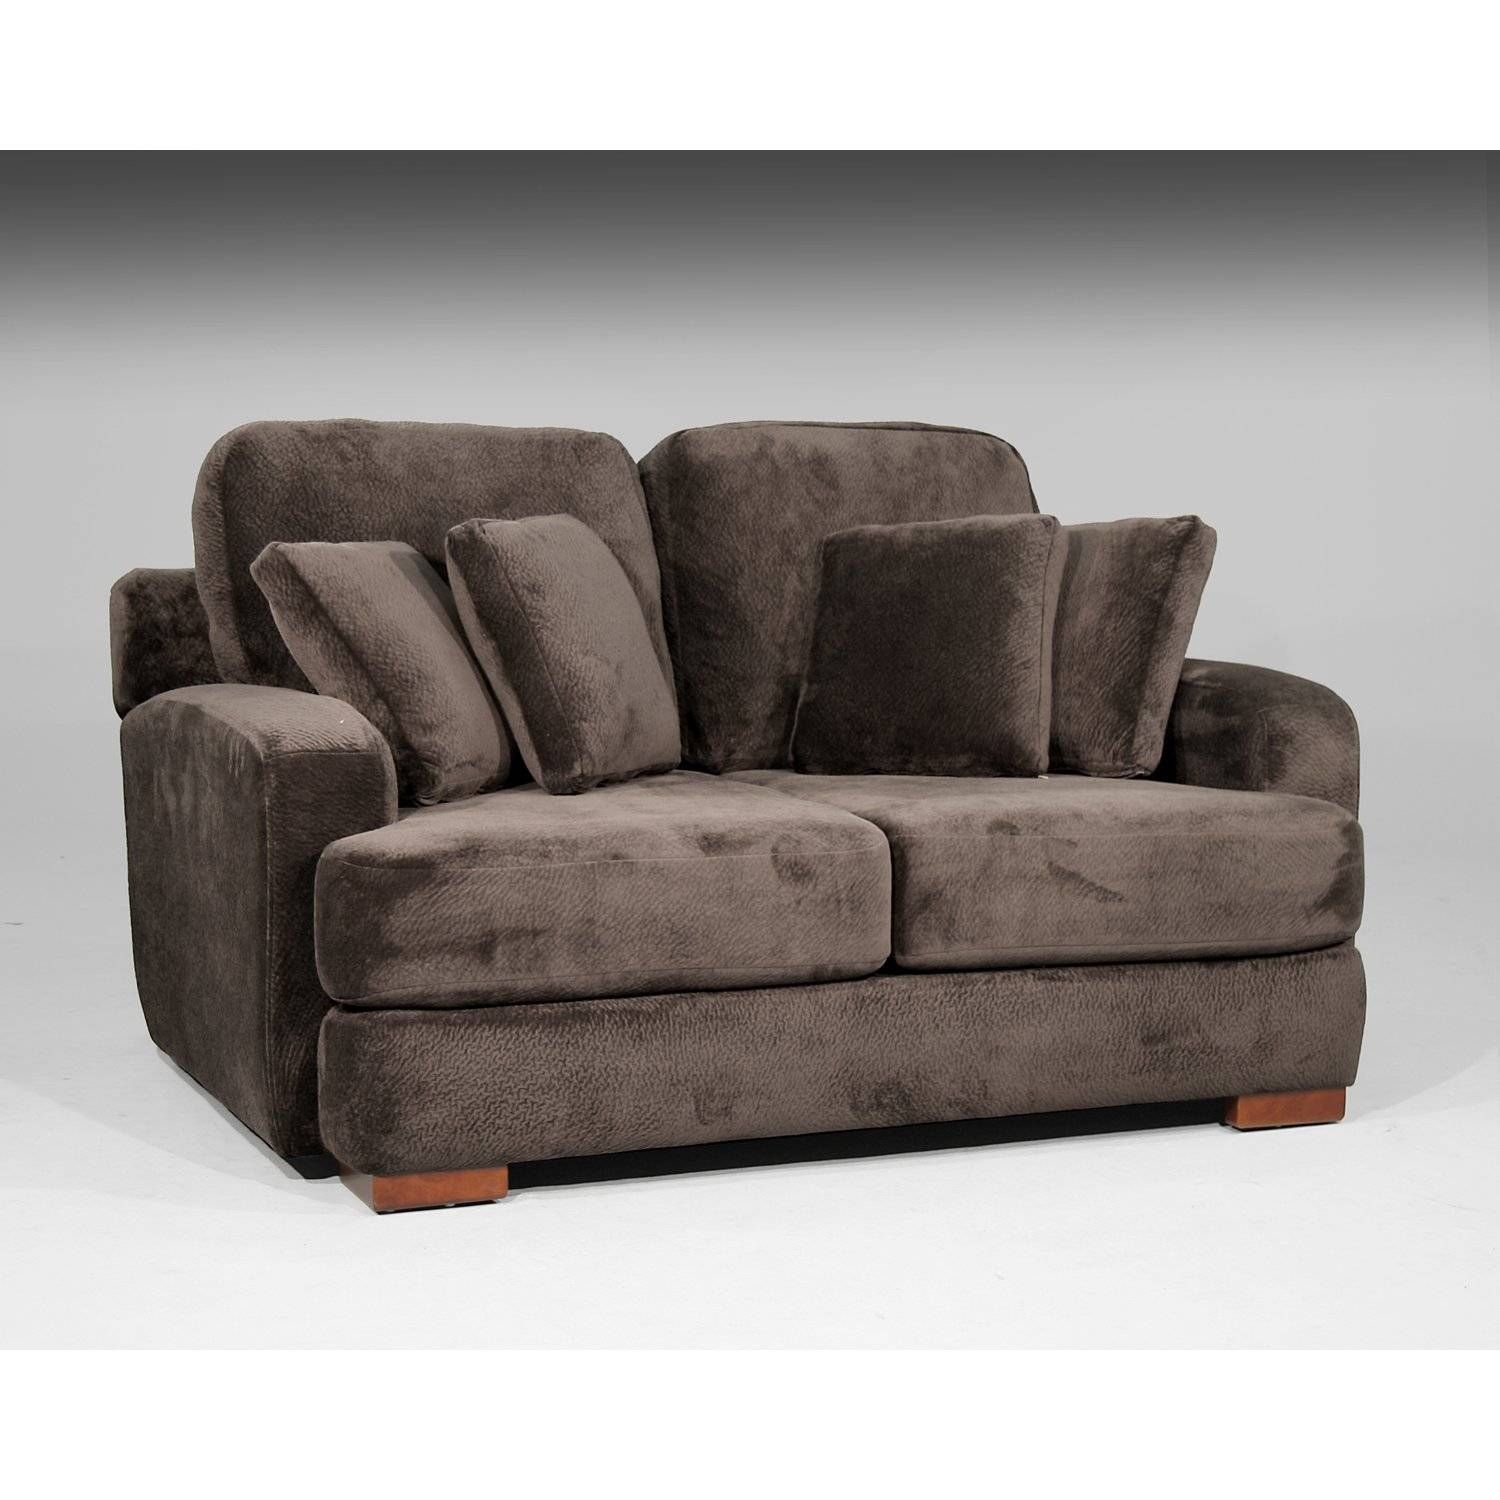 Snuggle Sofas – Leather Sectional Sofa Within Snuggle Sofas (View 3 of 30)